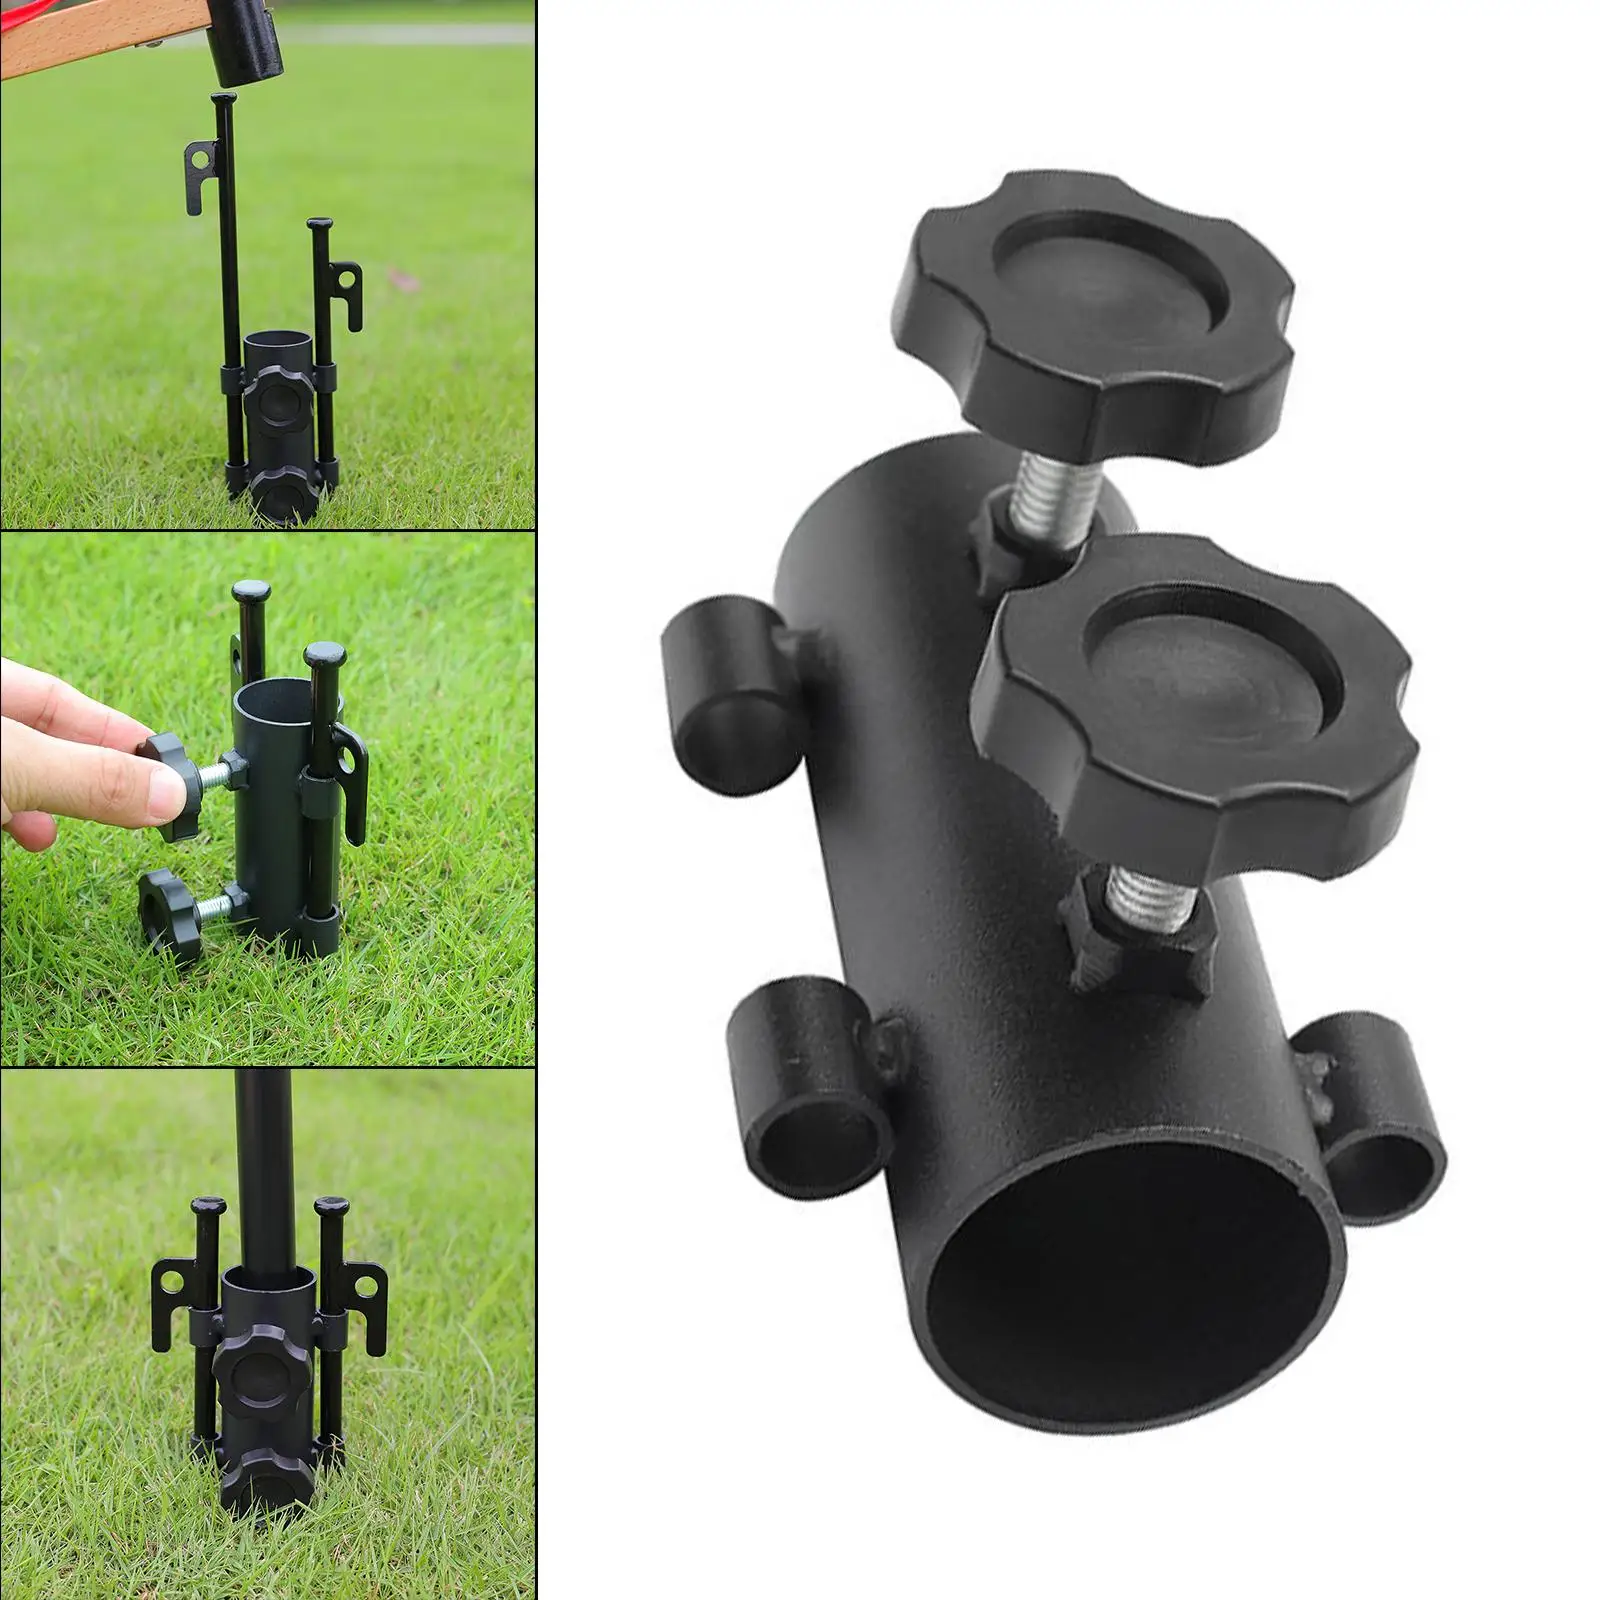 

Portable Awning Rod Holder Fixed Tube Metal Reinforced Canopy Poles Stand for Traveling Hiking Outdoor Camping Picnic BBQ